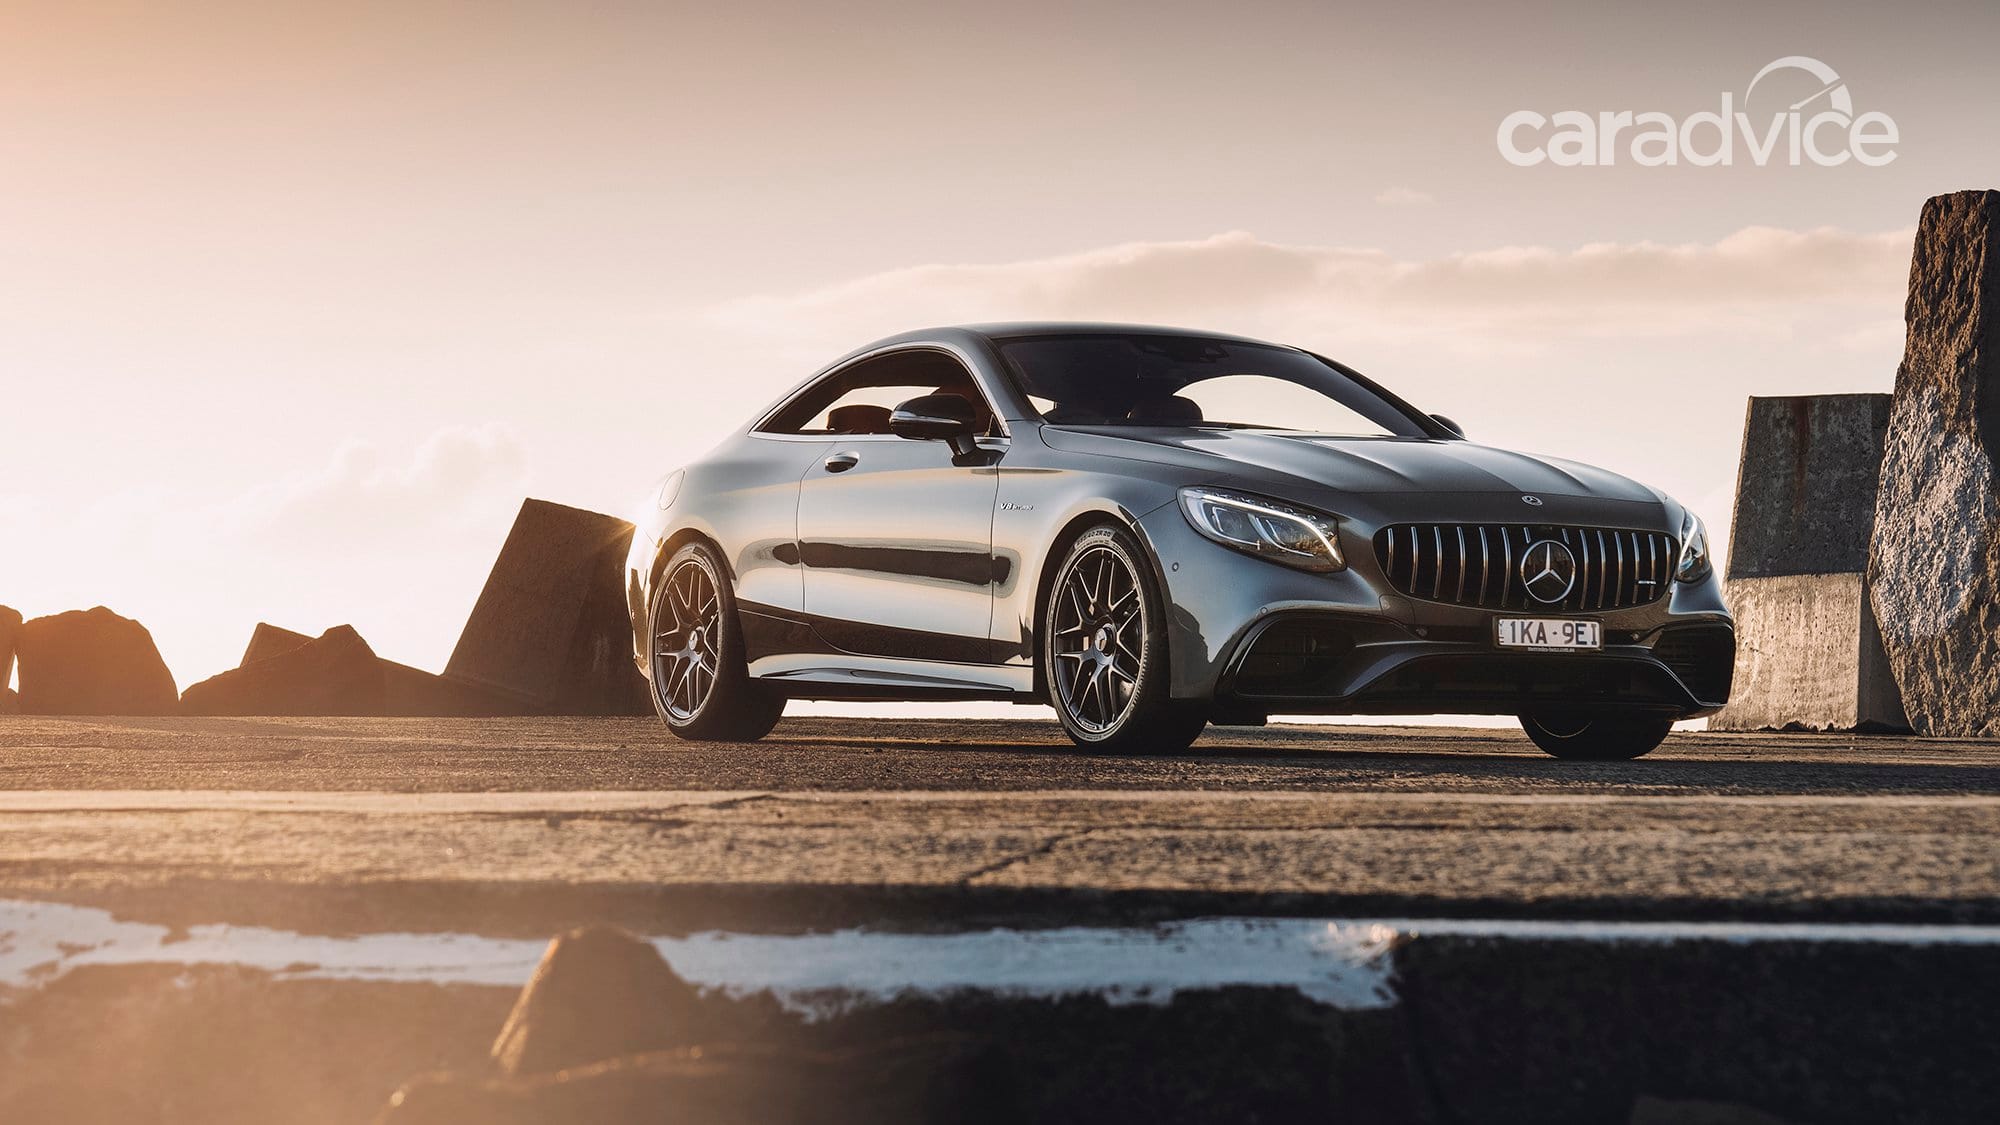 2019 Mercedes-Benz S-Class Coupe, Convertible pricing and specs | CarAdvice